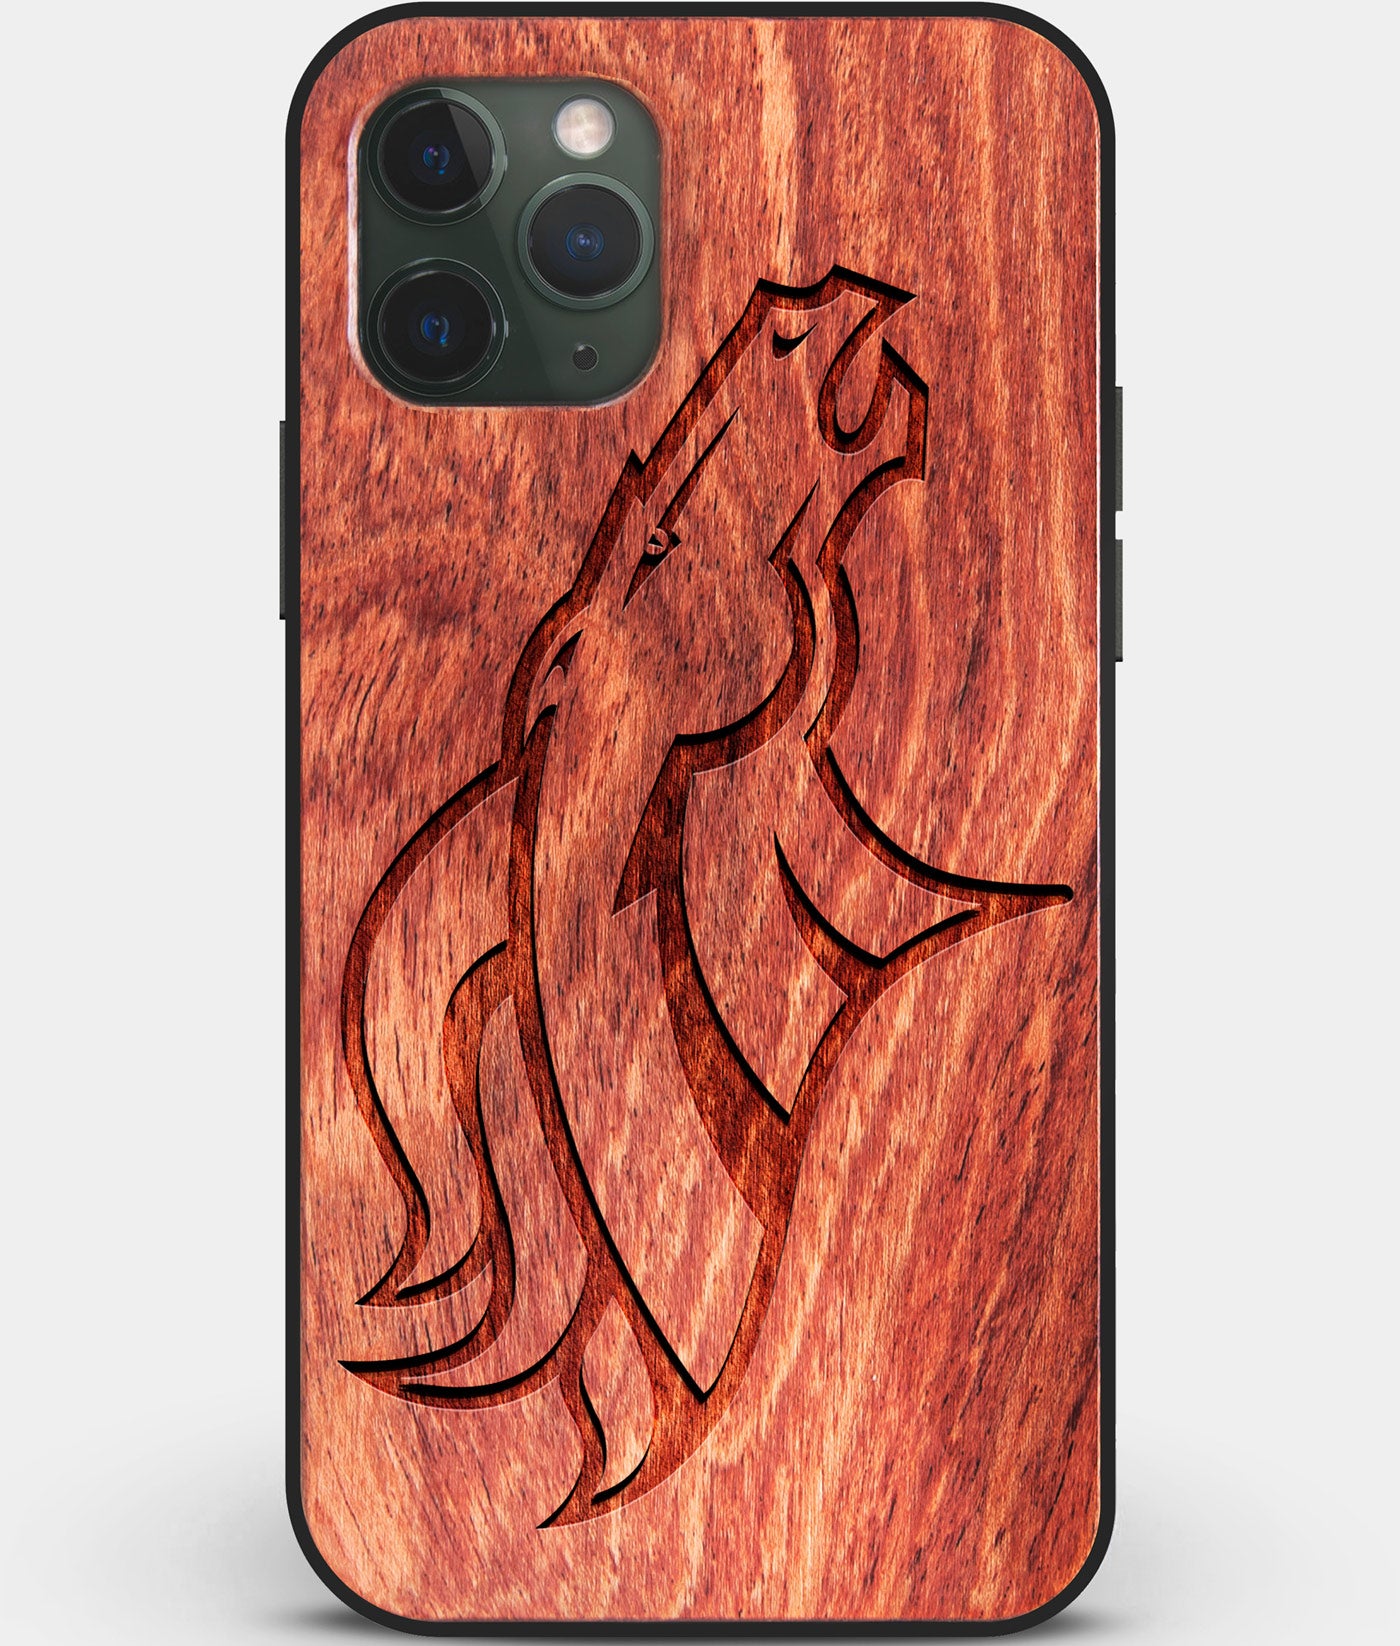 Custom Carved Wood Denver Broncos iPhone 11 Pro Max Case | Personalized Mahogany Wood Denver Broncos Cover, Birthday Gift, Gifts For Him, Monogrammed Gift For Fan | by Engraved In Nature